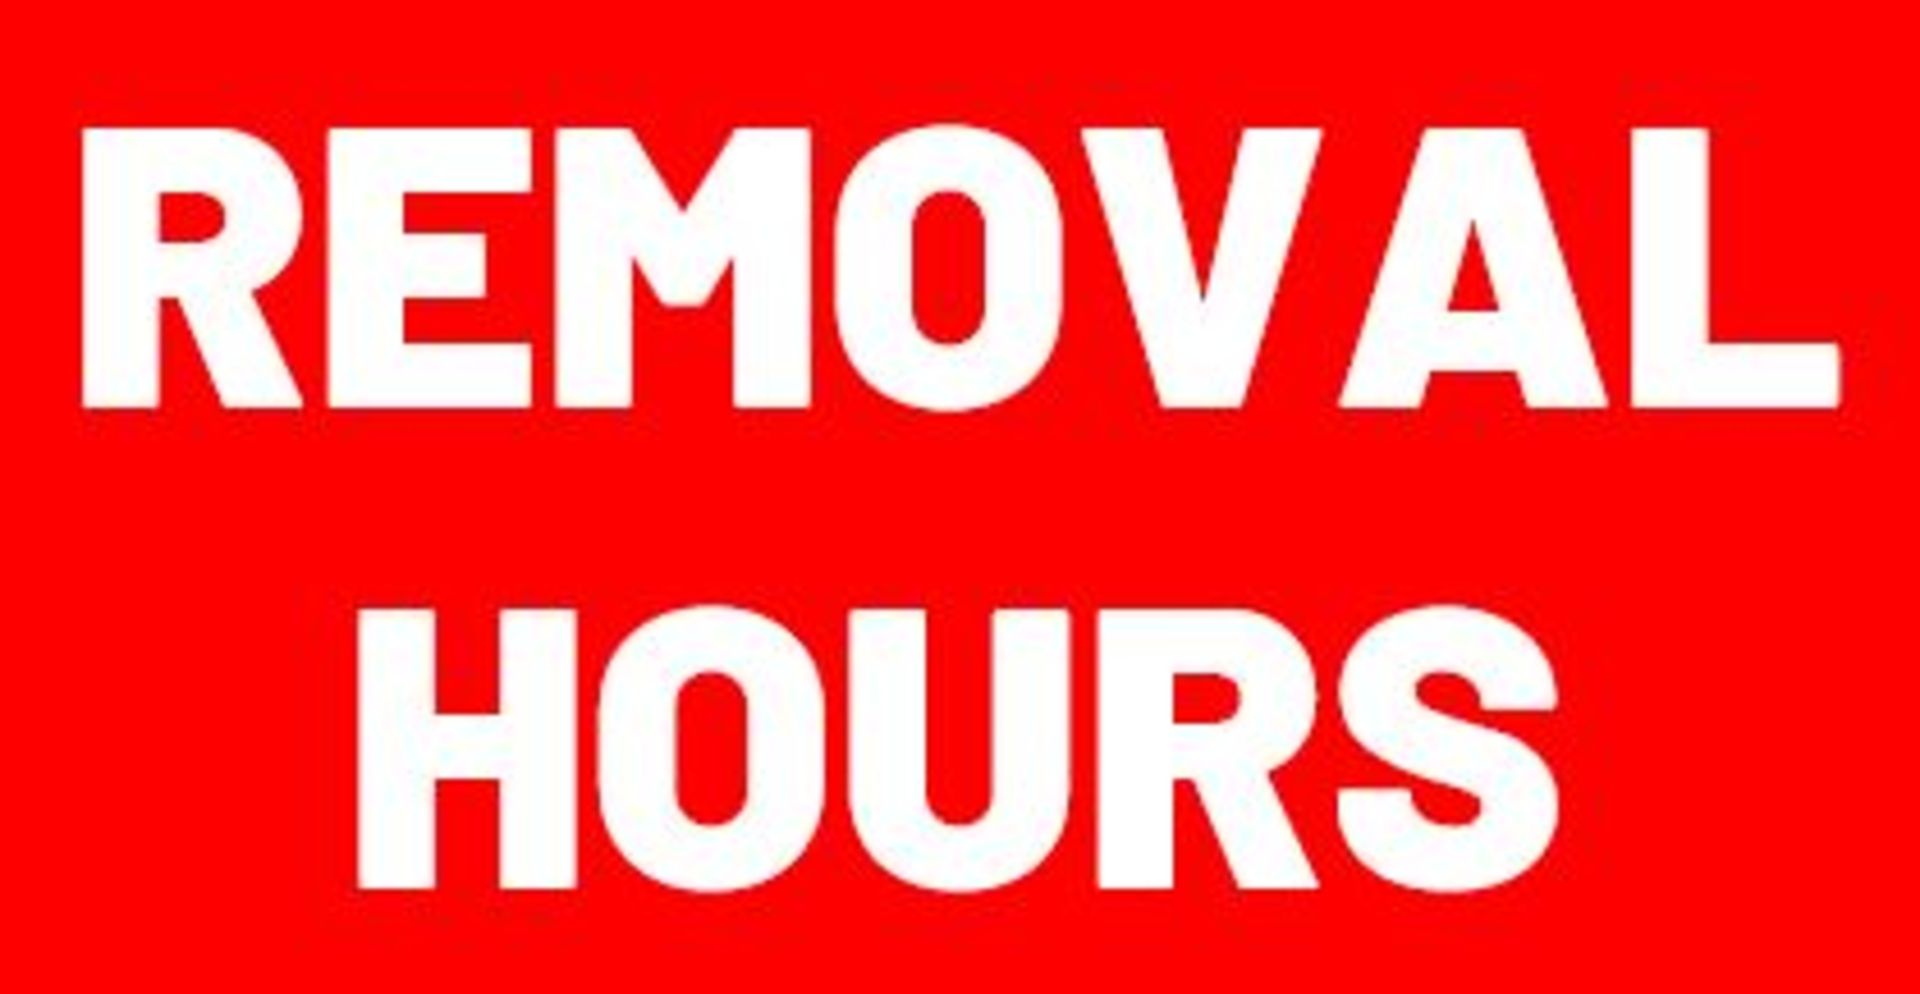 Due to our personnel commuting from Cincinnati daily the removal hours will be 9:00 AM to 3:00 PM